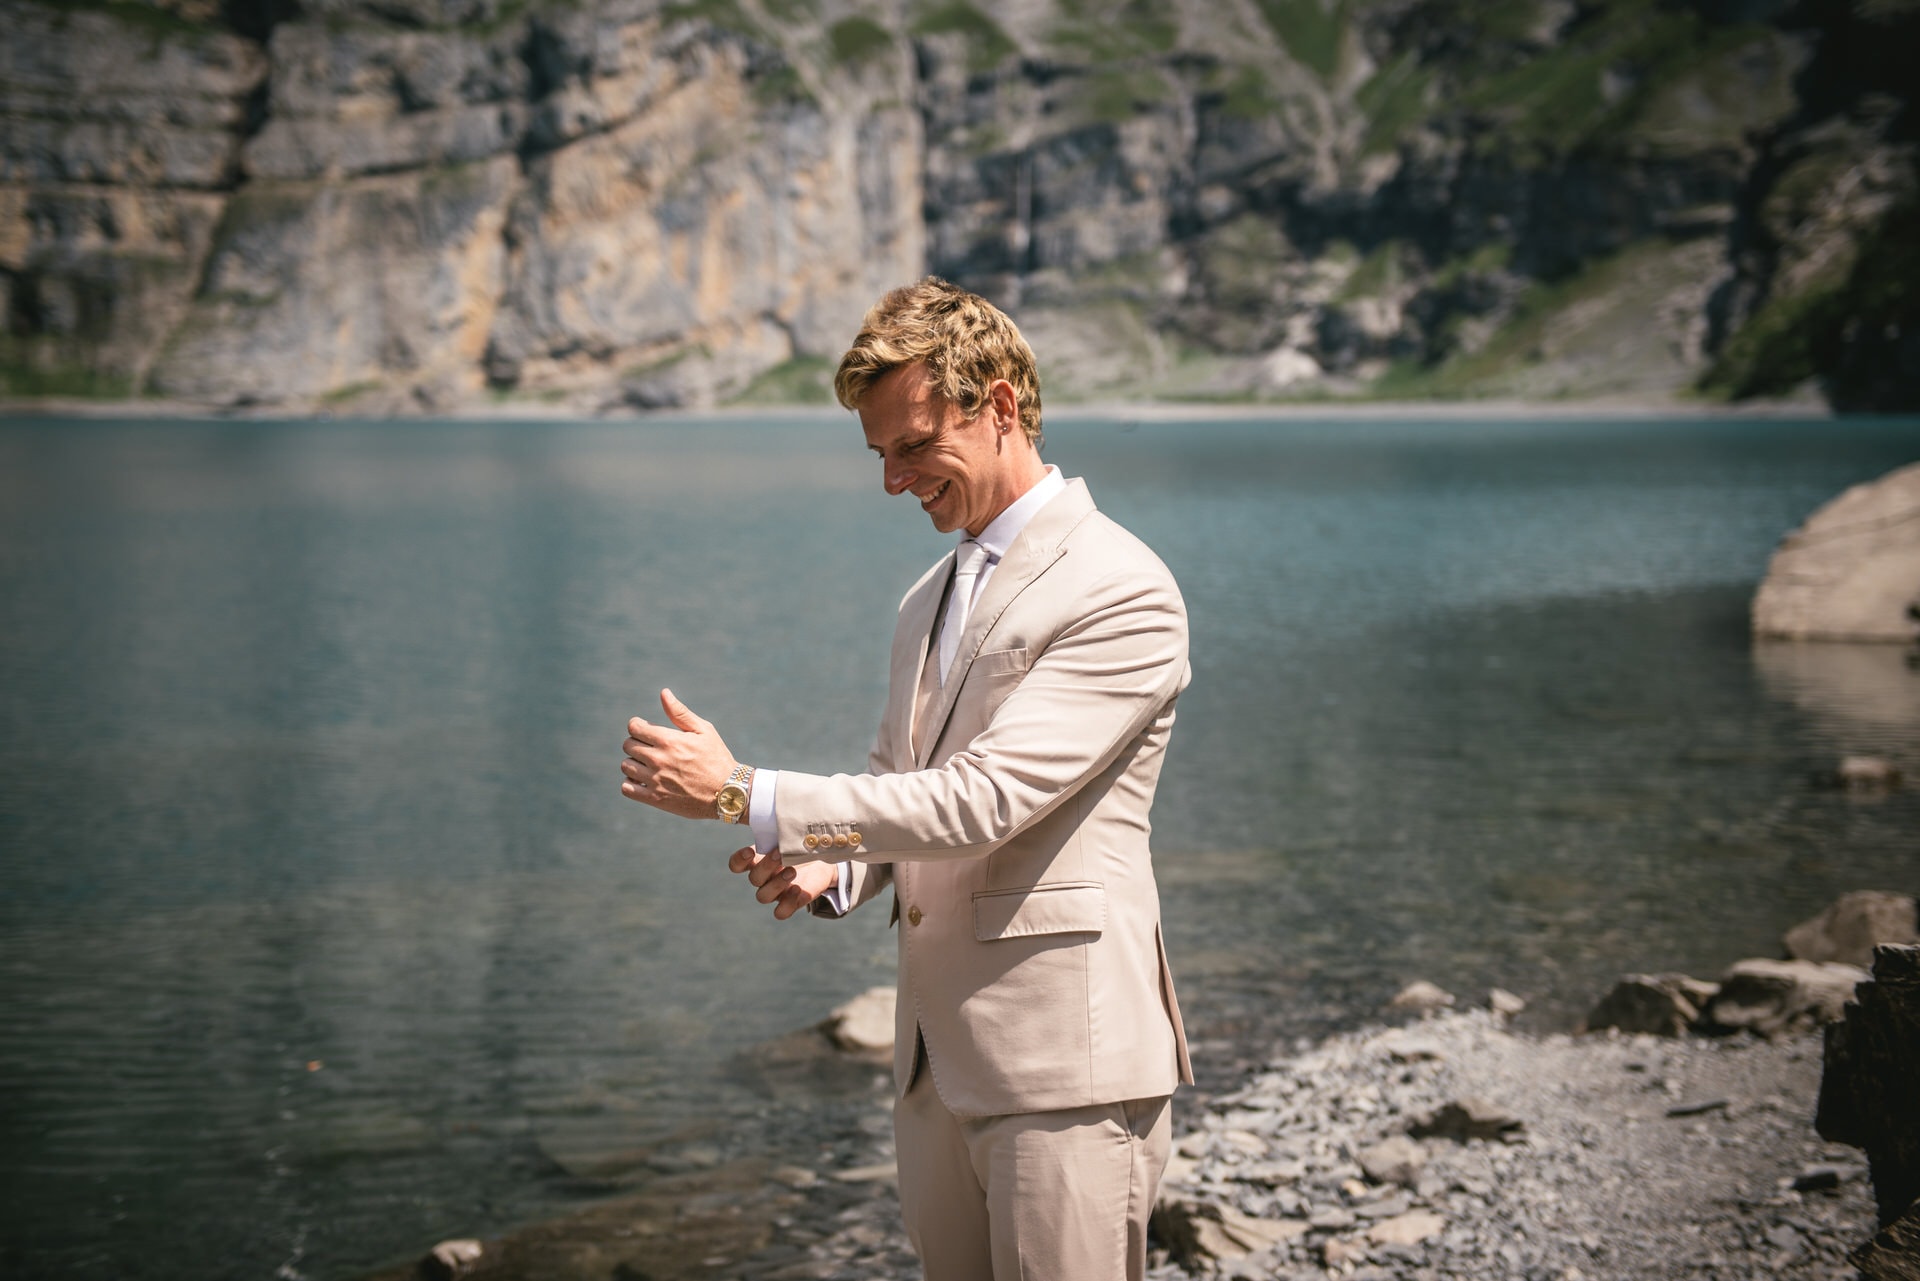 Swiss trails led to eternal vows - Emily & Luke's hiking elopement.